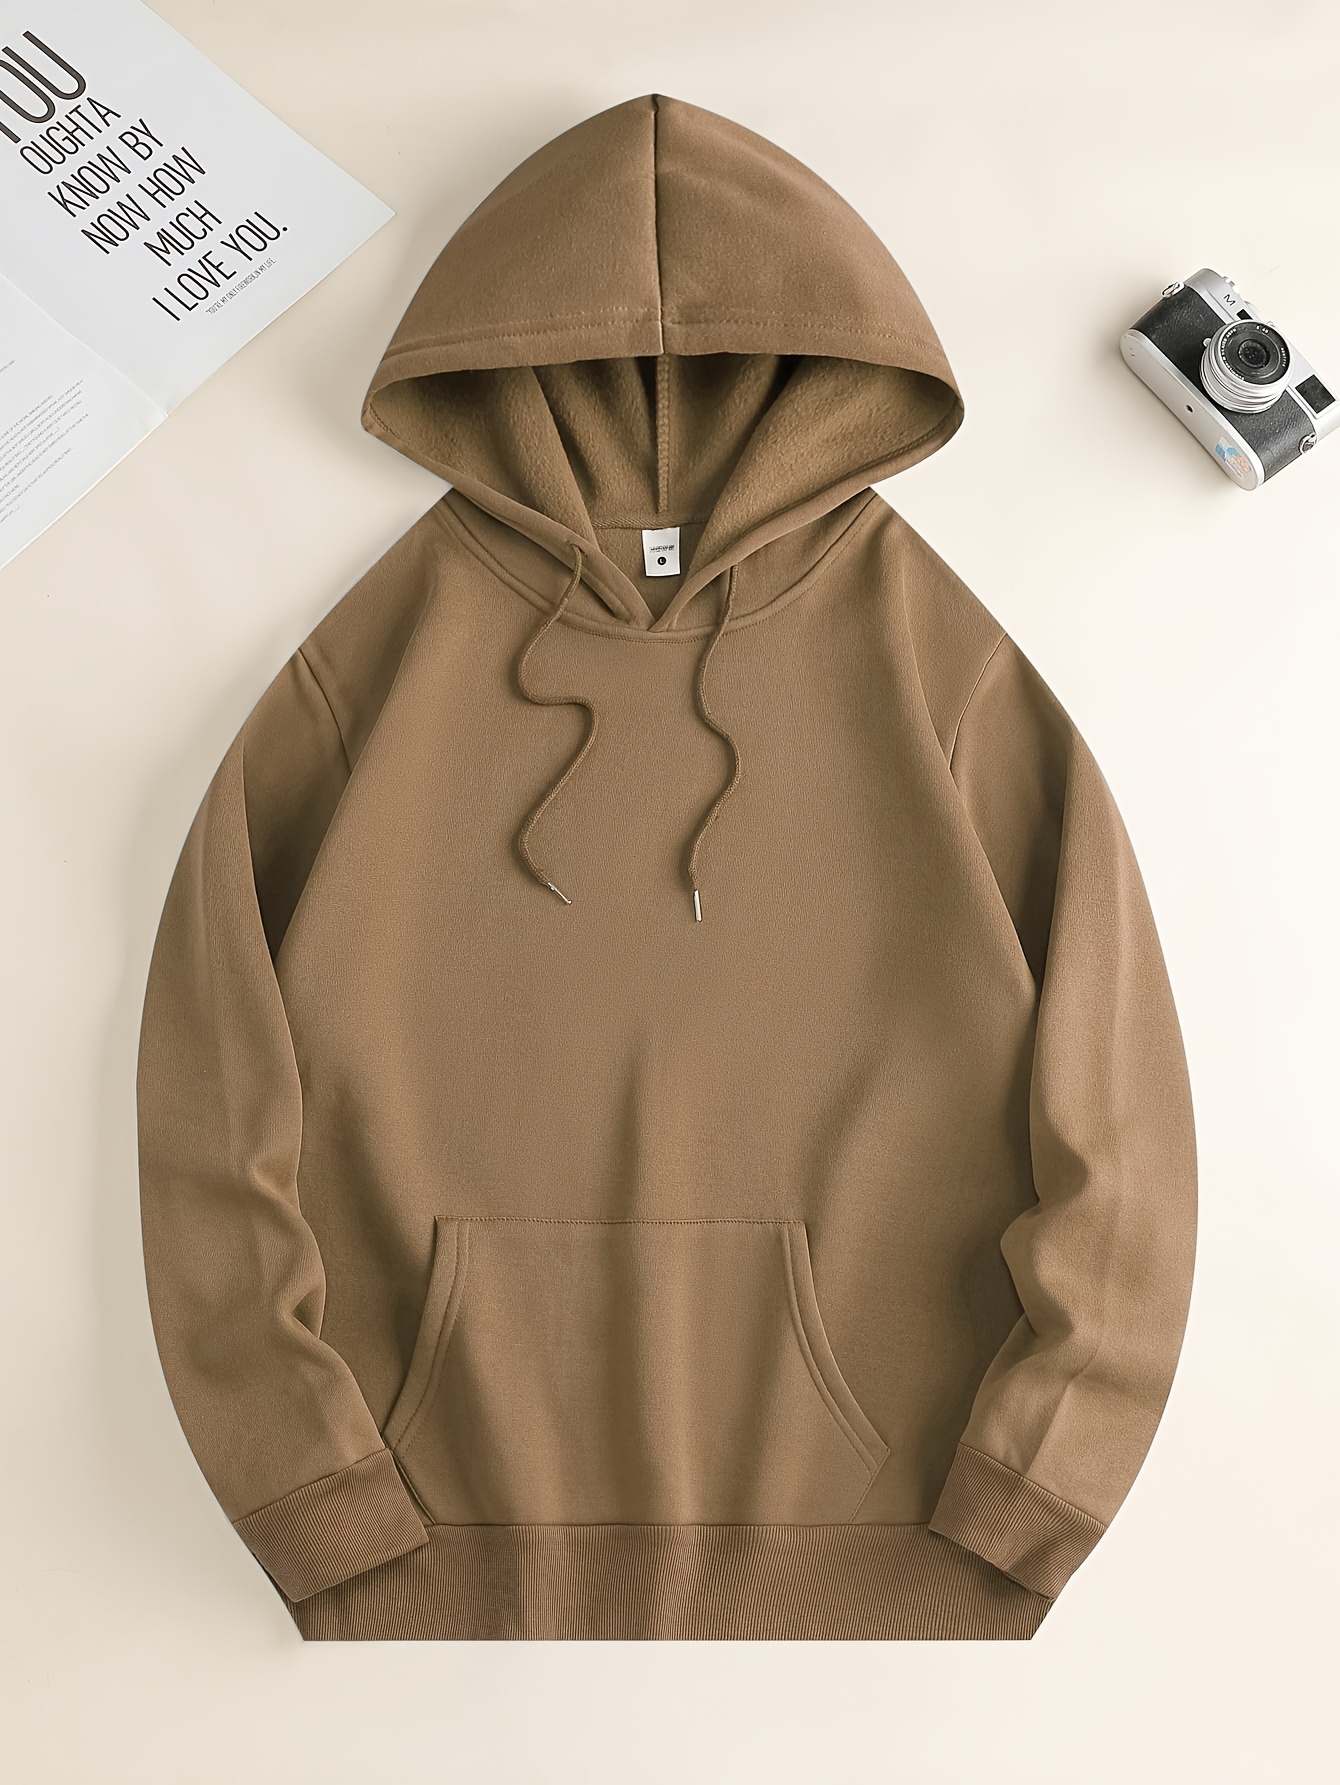 you are amazing print mens pullover round neck hoodies with kangaroo pocket long sleeve hooded sweatshirt loose casual top for autumn winter mens clothing as gifts details 8